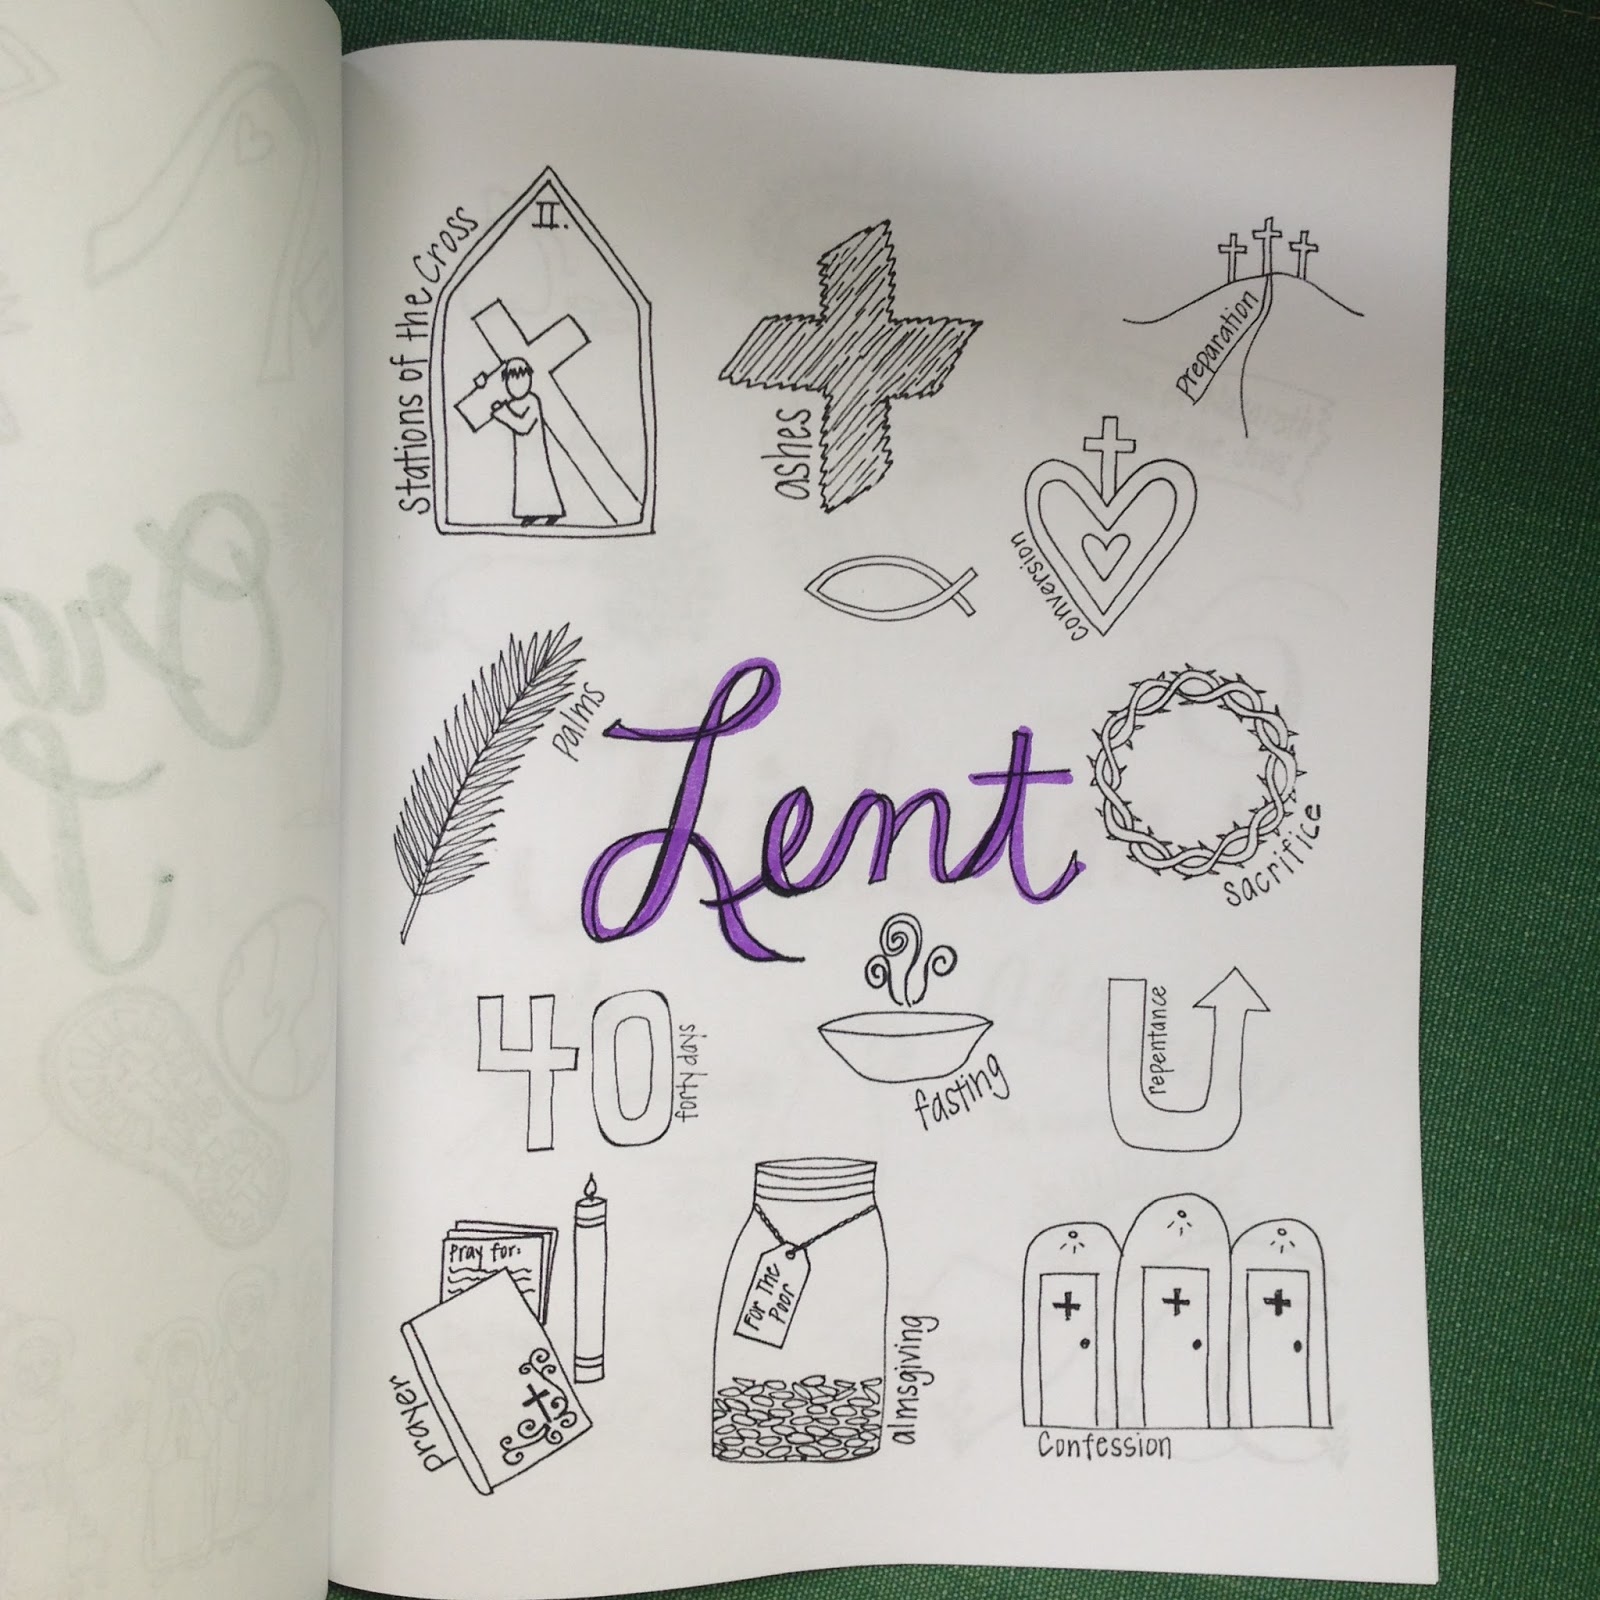 church year coloring pages january